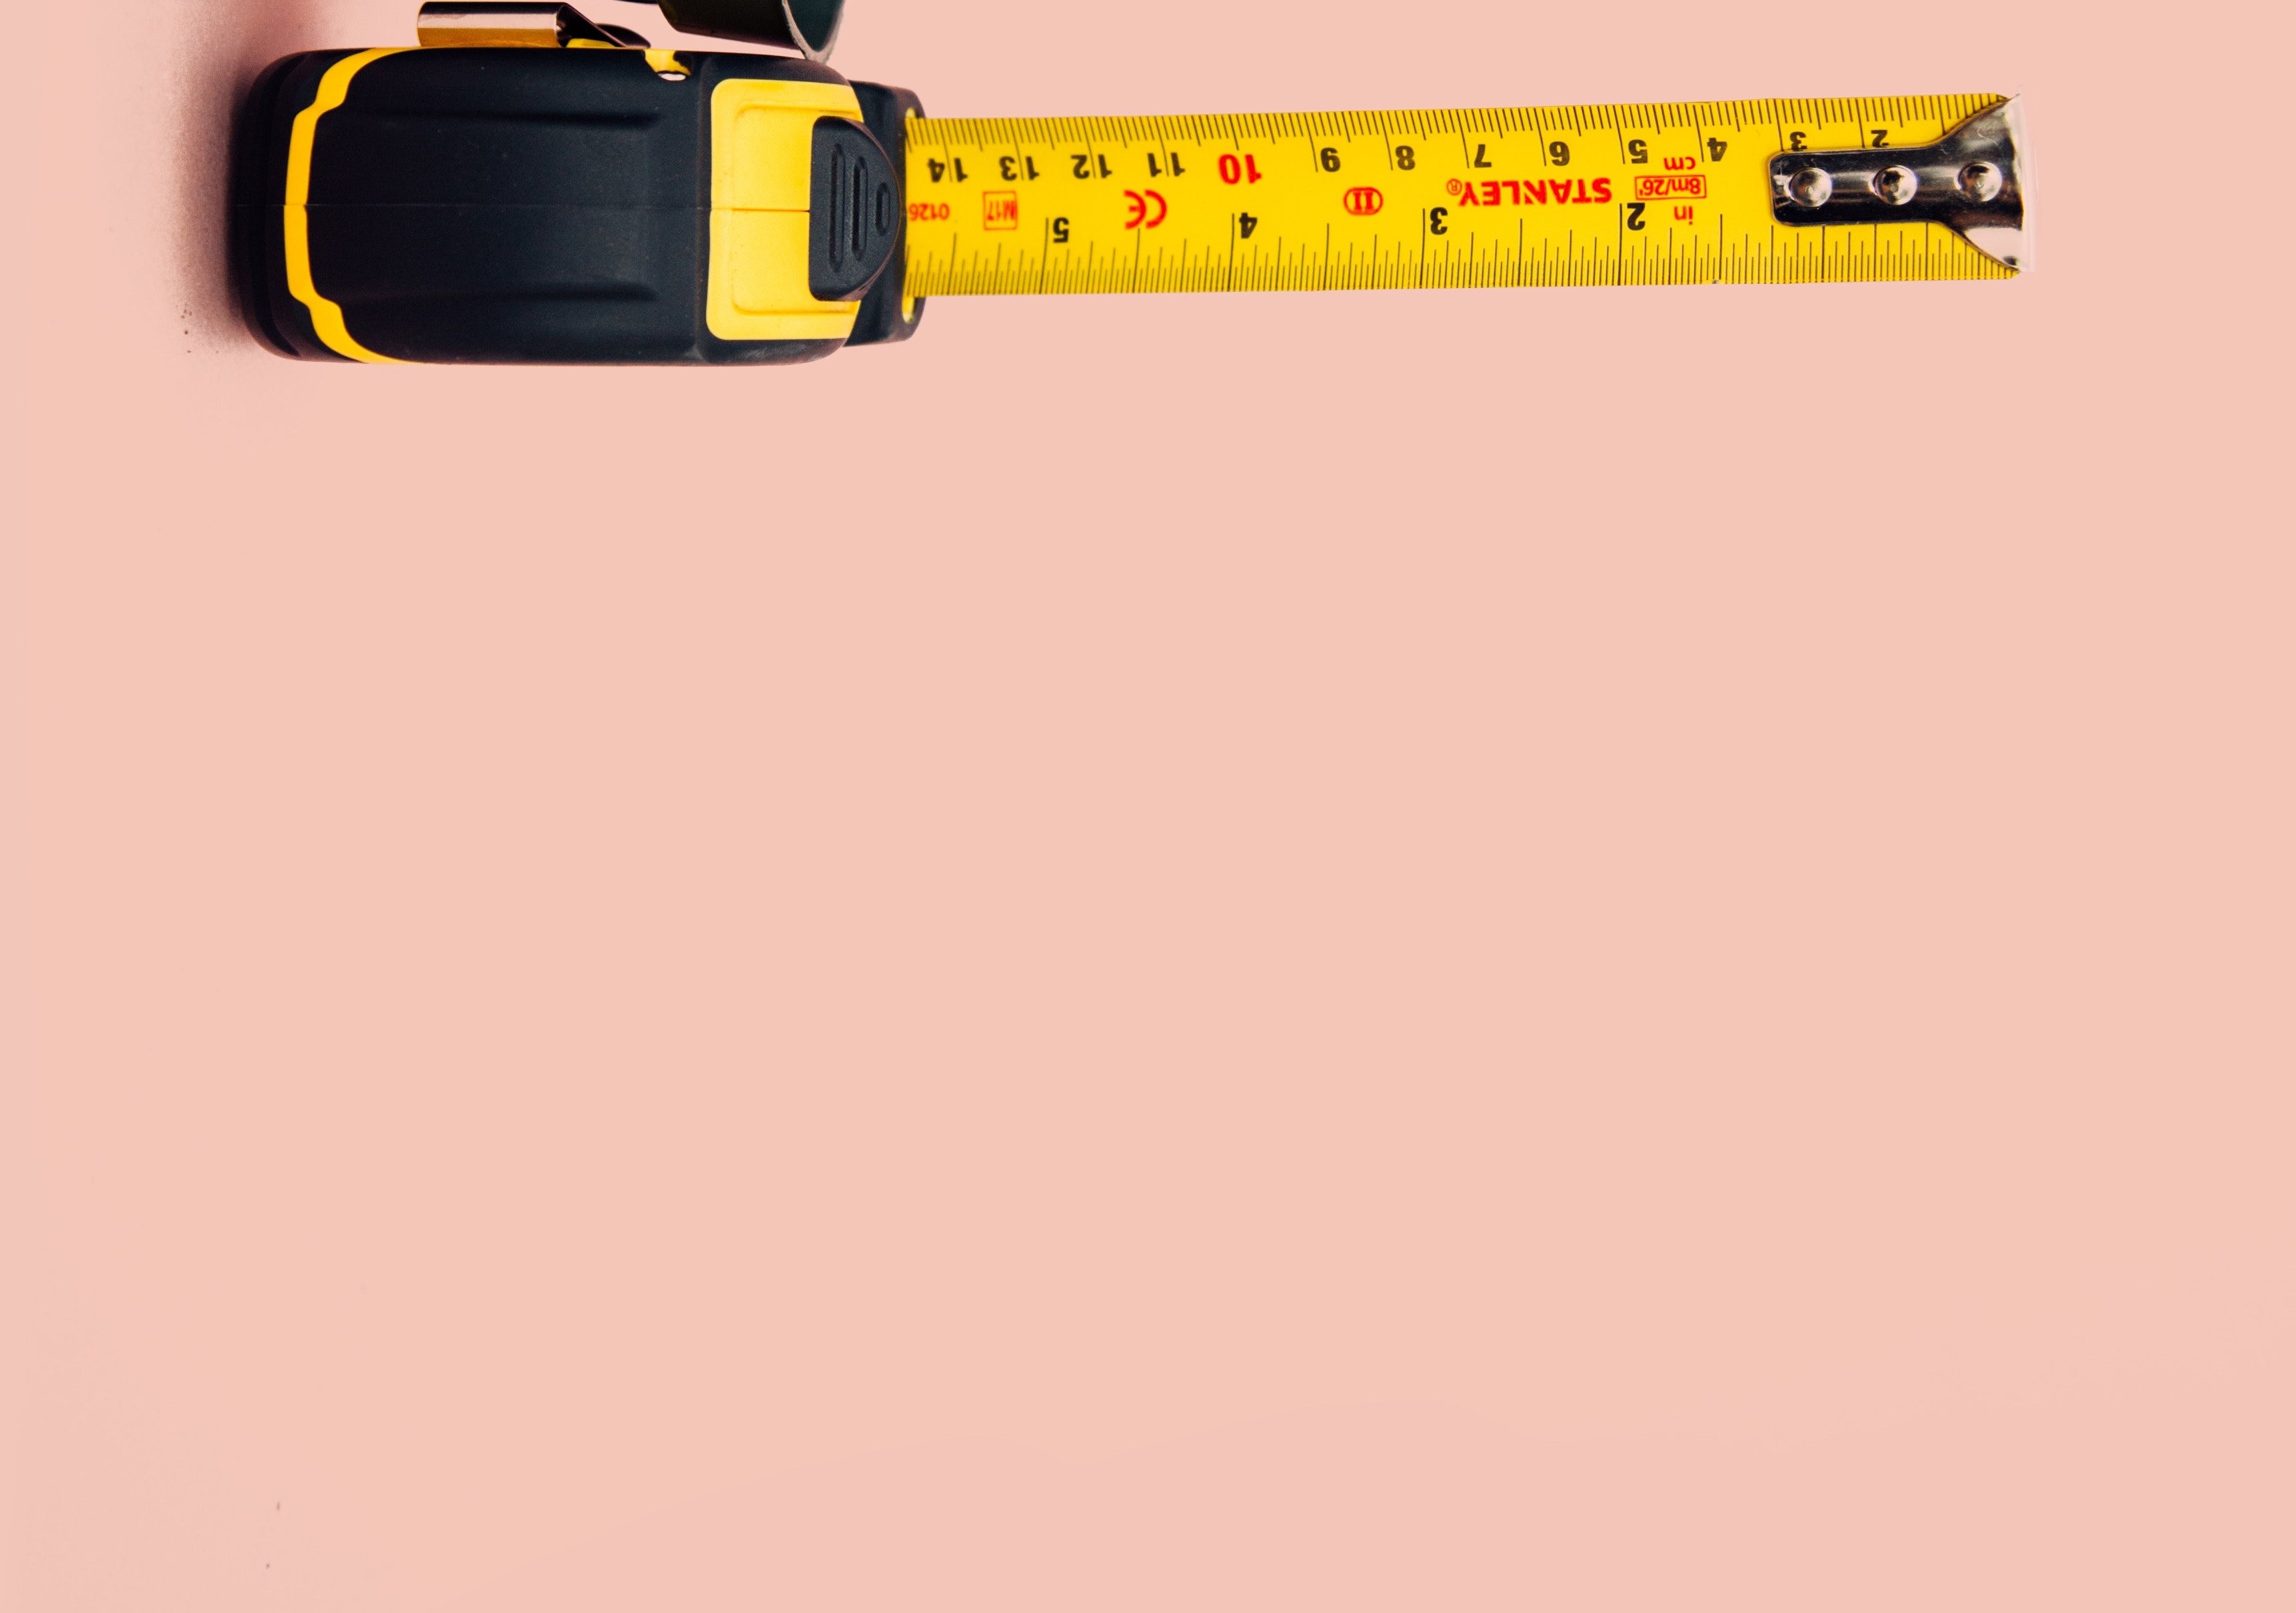 Tape measure on pink background